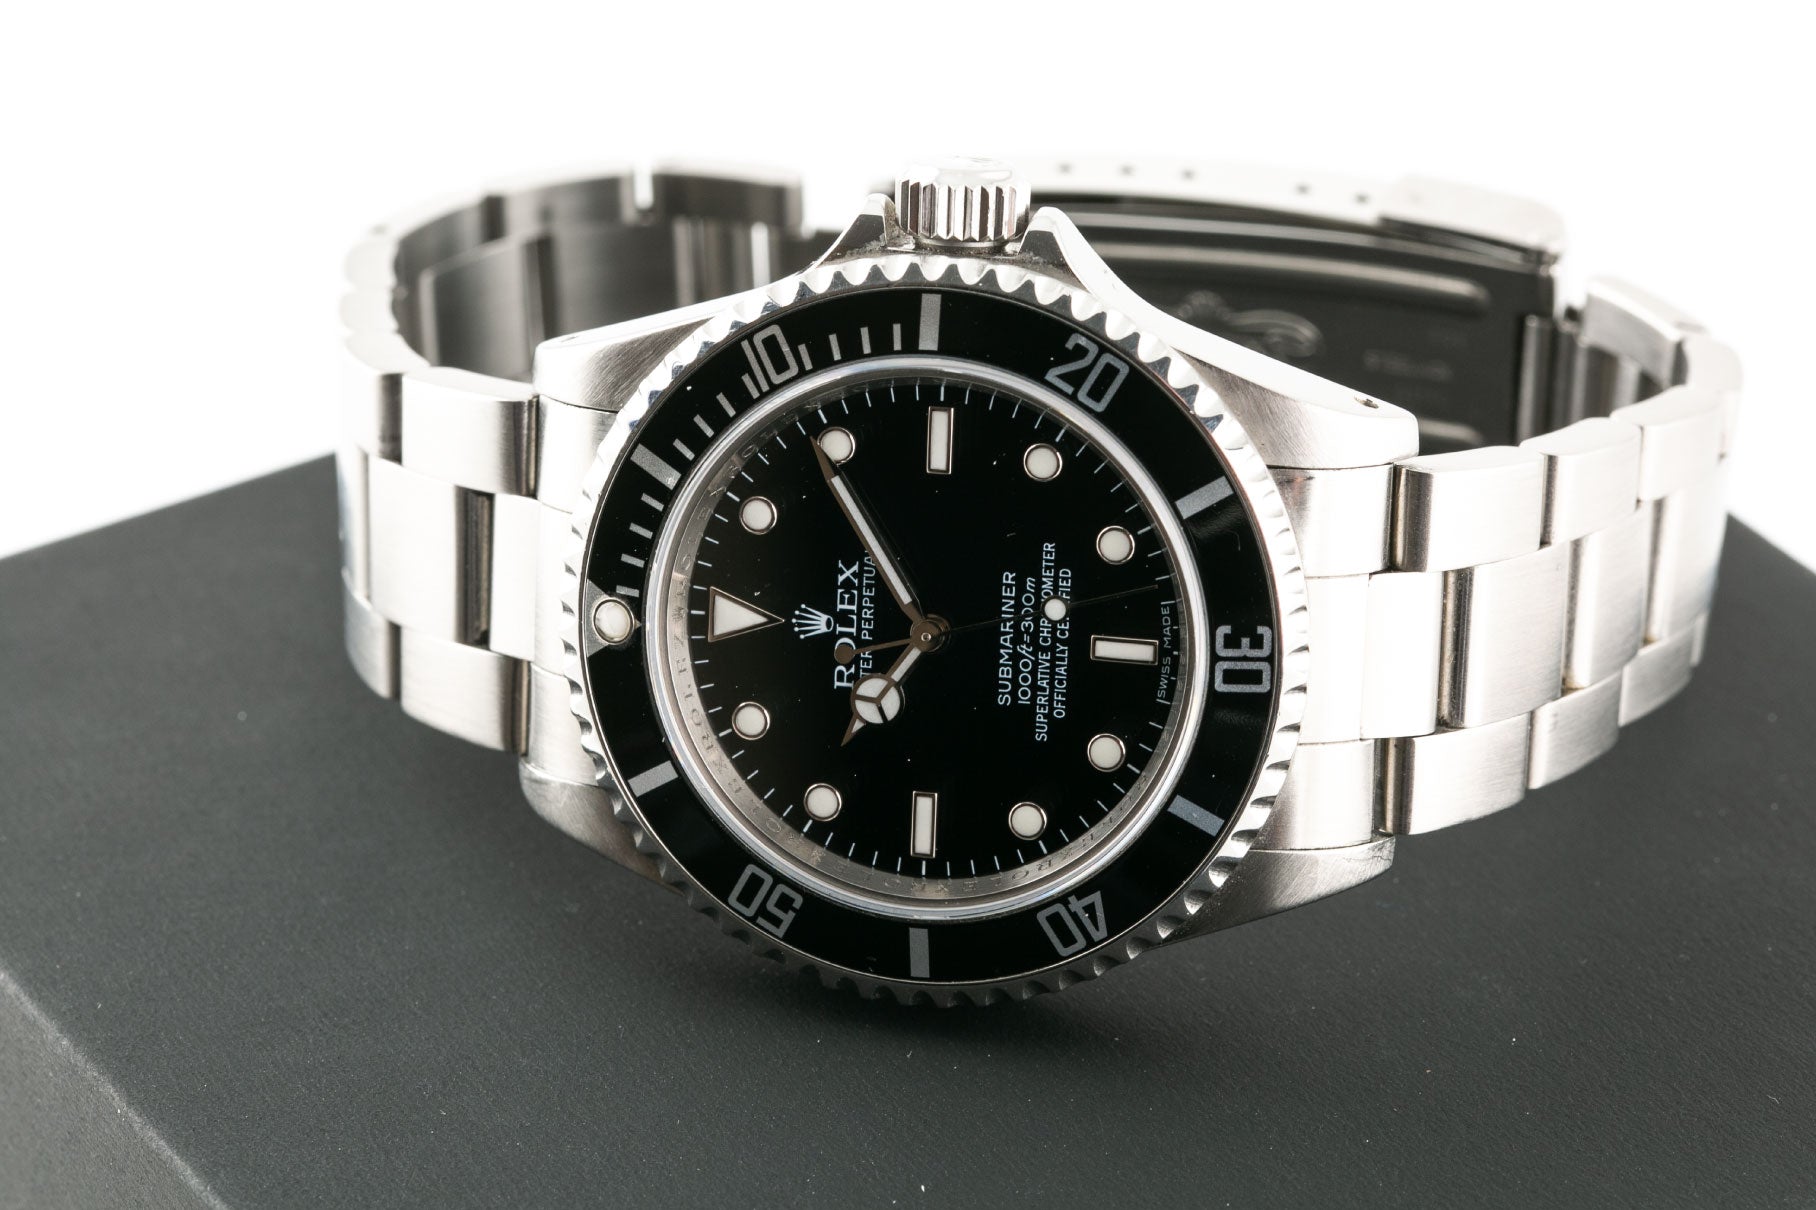 Rolex Submariner Non Date Oyster Perpetual 14060M - Parkers Jewellers